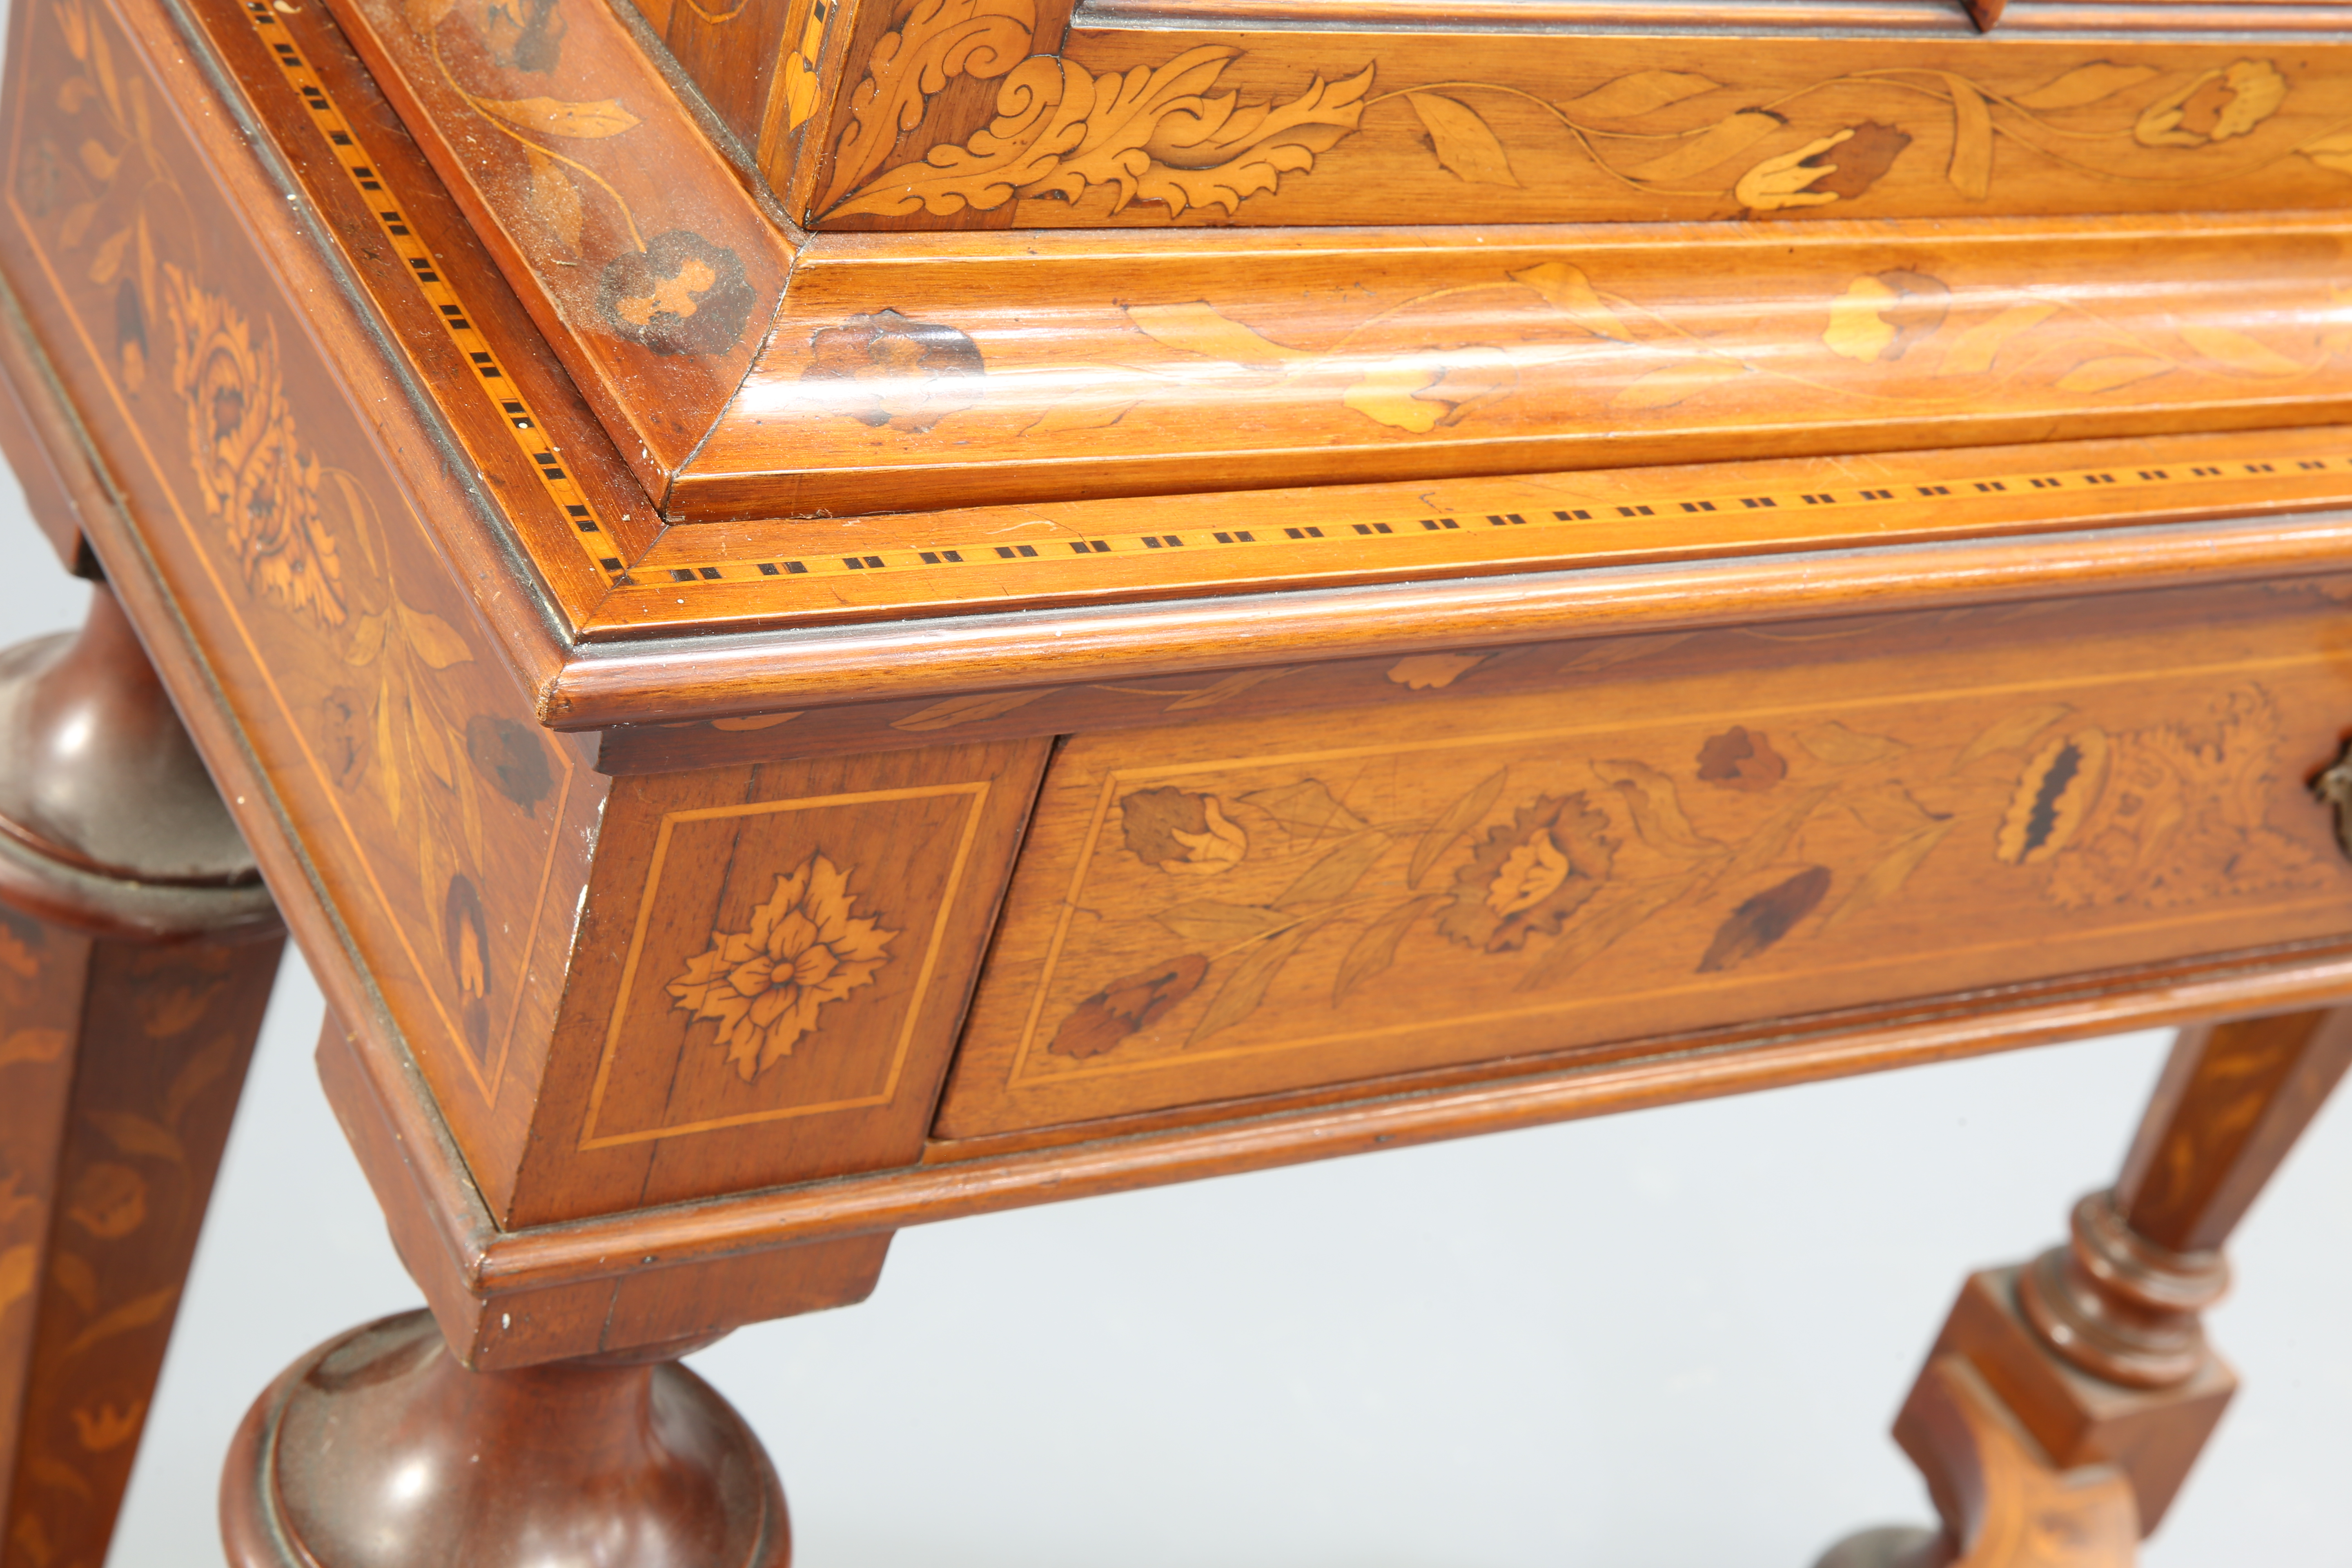 A 19TH CENTURY CONTINENTAL FLORAL MARQUETRY WALNUT CABINET ON STAND - Image 2 of 3